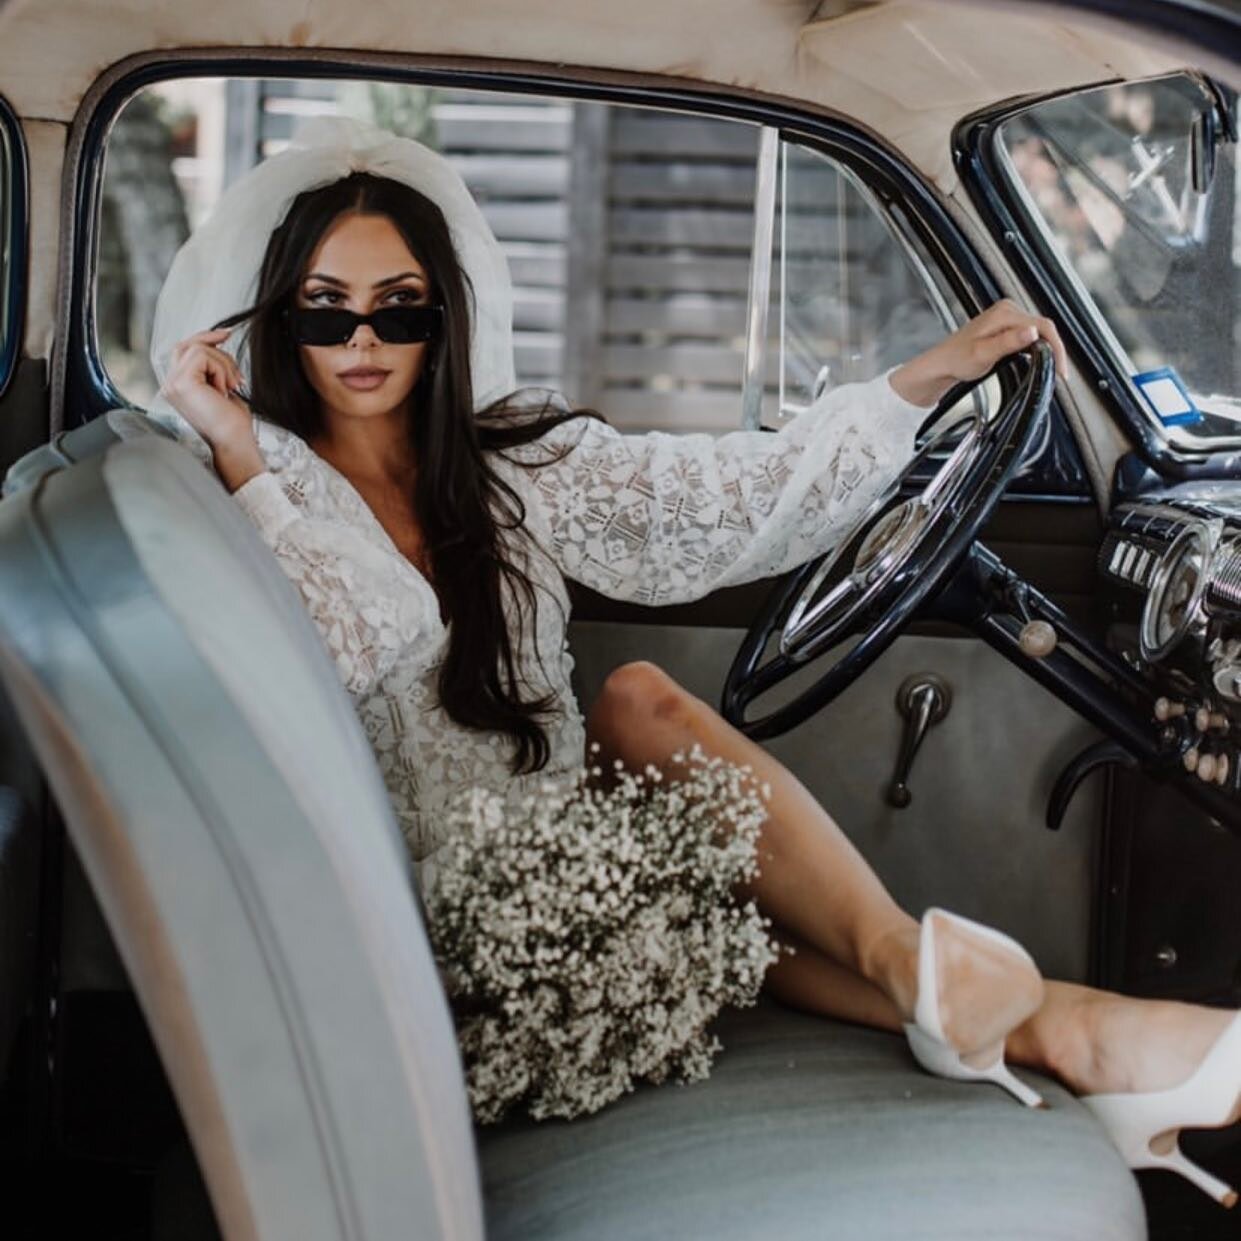 hey future husband, get in. we&rsquo;re blowing this popsicle stand 💨💨

Thanks @haleyisomphotography for having me apart of your elopement shoot. But it&rsquo;s the &ldquo;runaway bride* vibes for me 🤠

📸 by: @erinlynnkphotography 
makeup: @emily